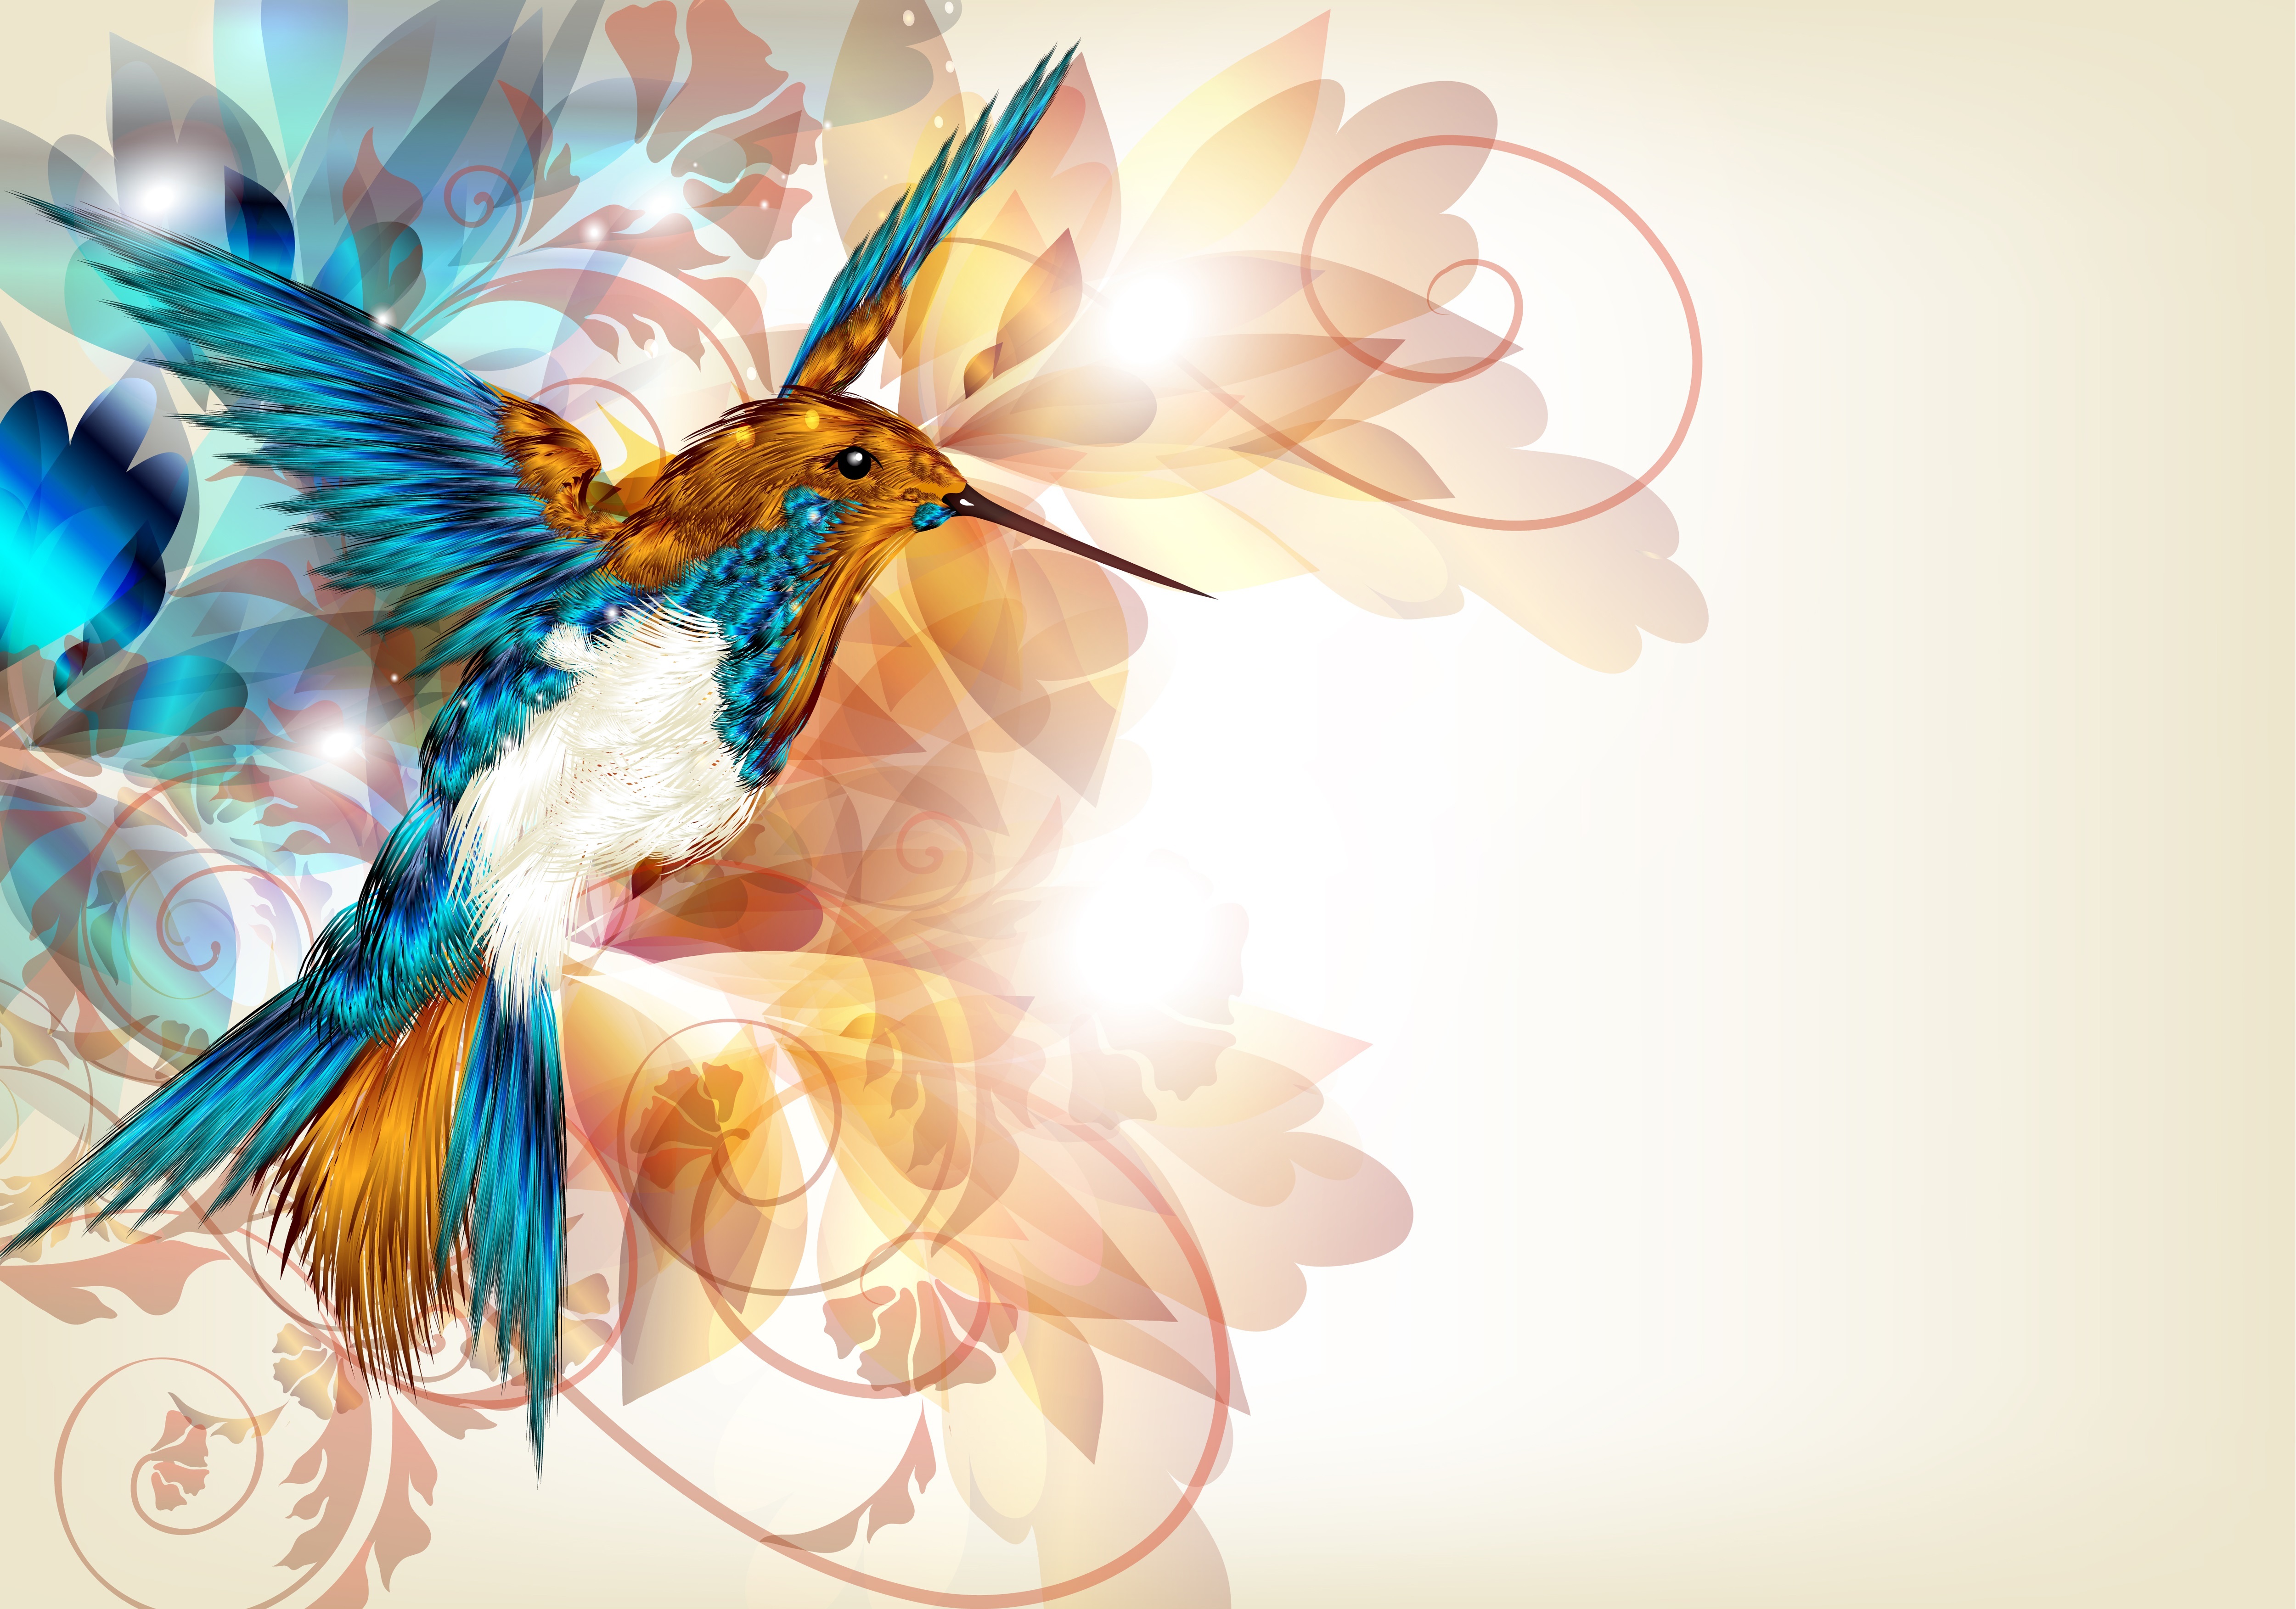 Delightful Hummingbird Live Wallpaper Overflowing in Flowers  Orchids   free download